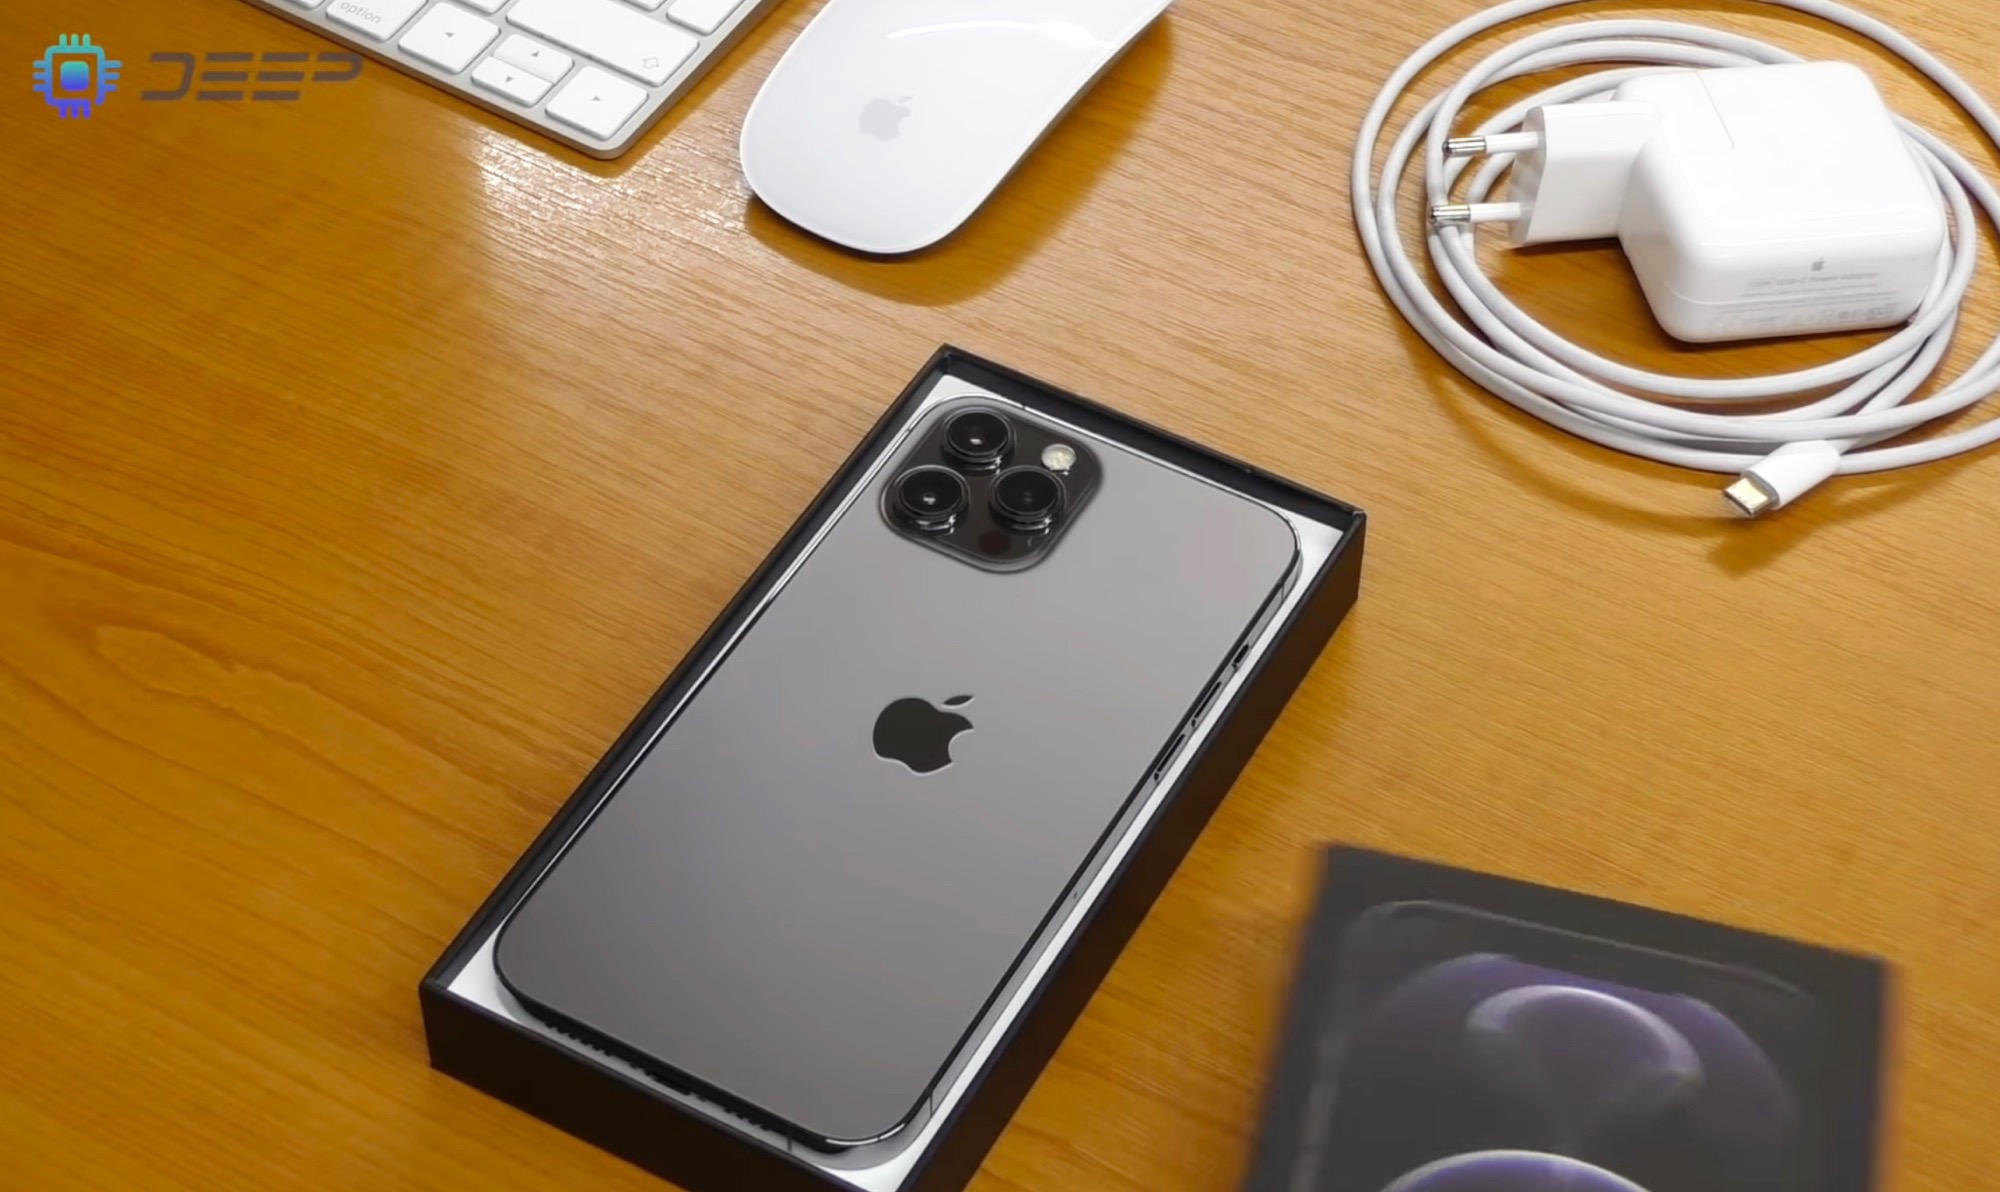 A modified Apple iPhone 12 Pro Max with an MFi-certified USB Type-C port is  now orderable -  News